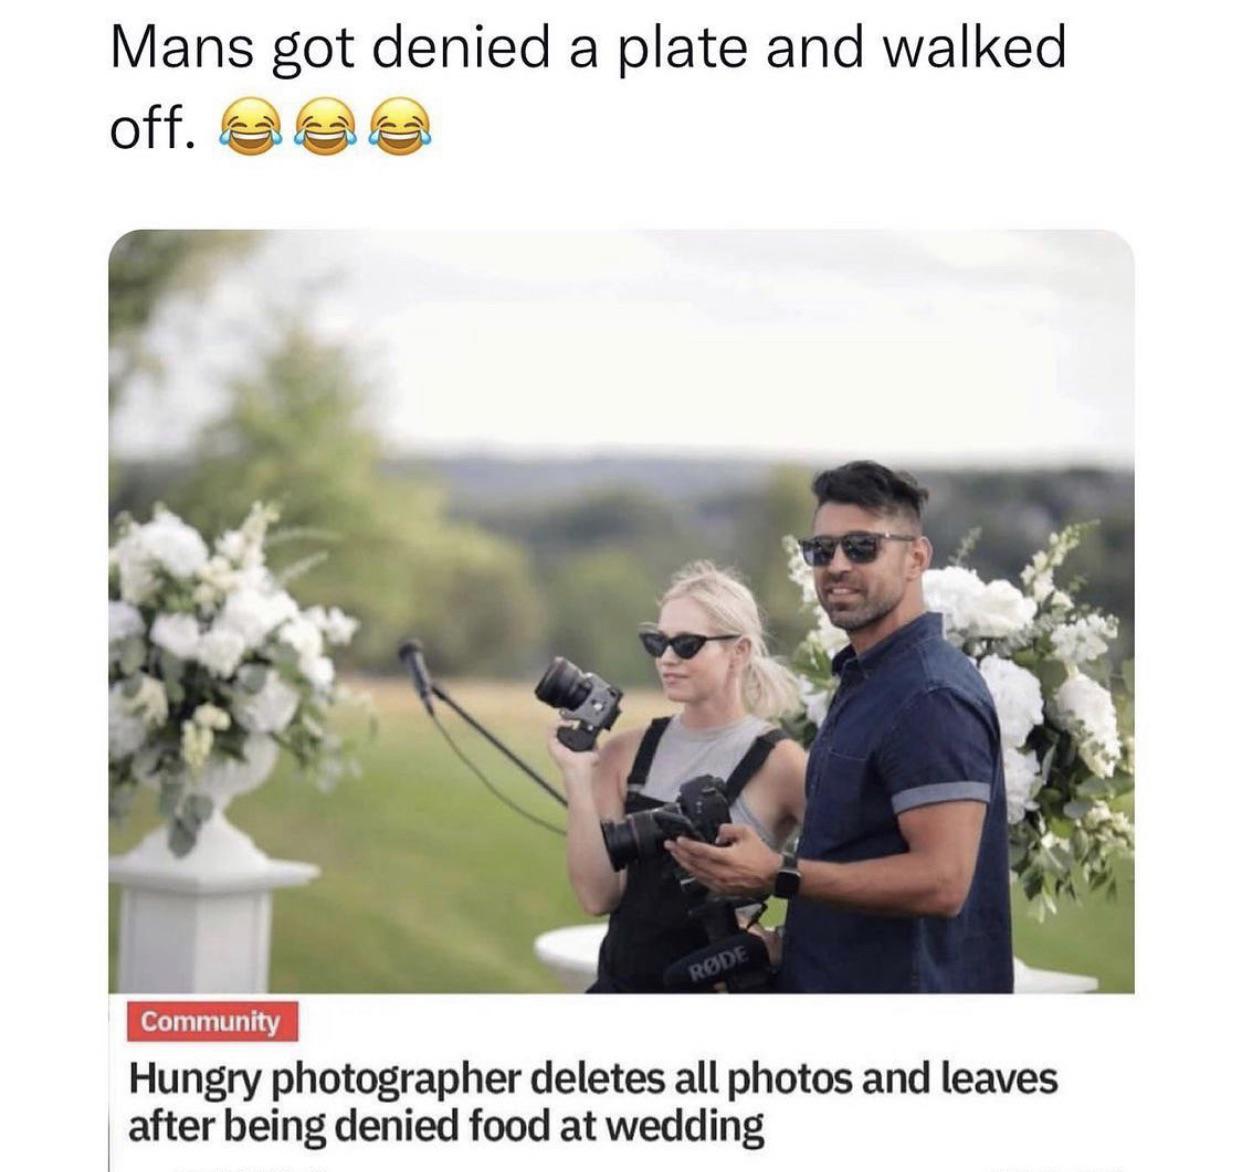 hungry photographer deletes all - Mans got denied a plate and walked off. Rde Community Hungry photographer deletes all photos and leaves after being denied food at wedding